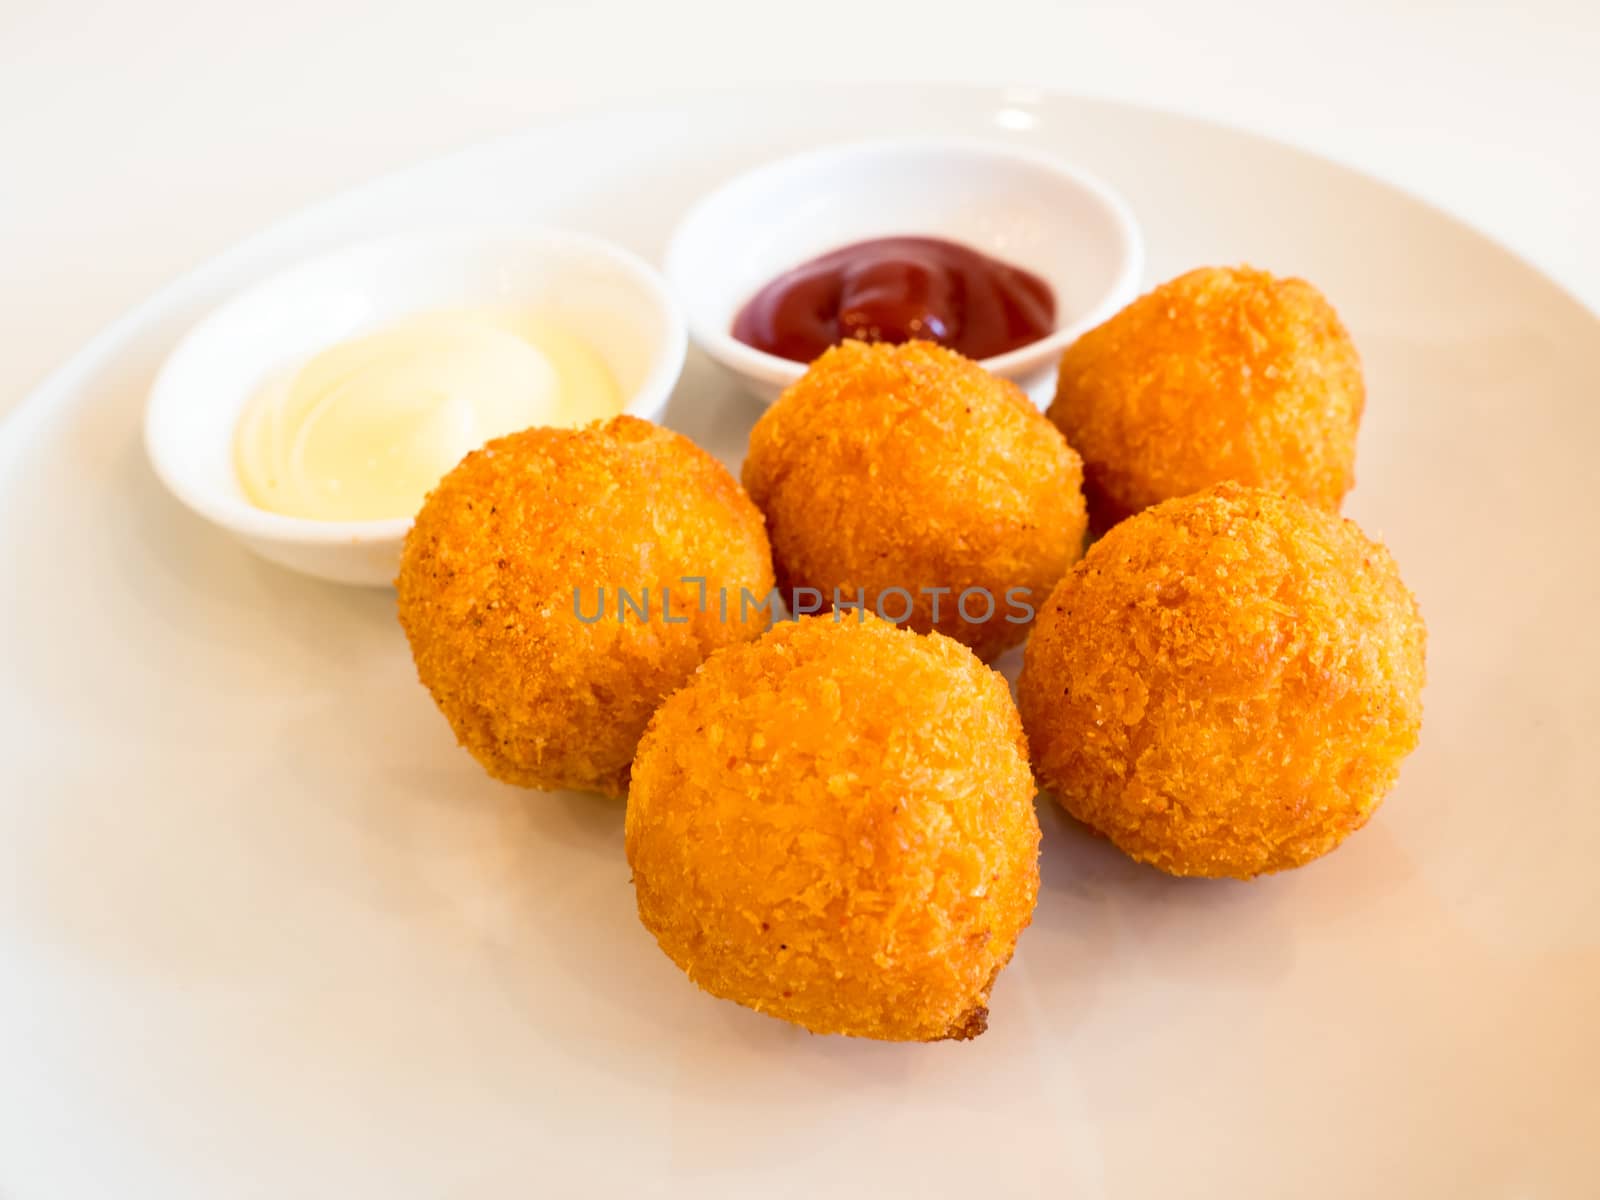 Deep fried cheese balls with sauce on white background by APTX4869